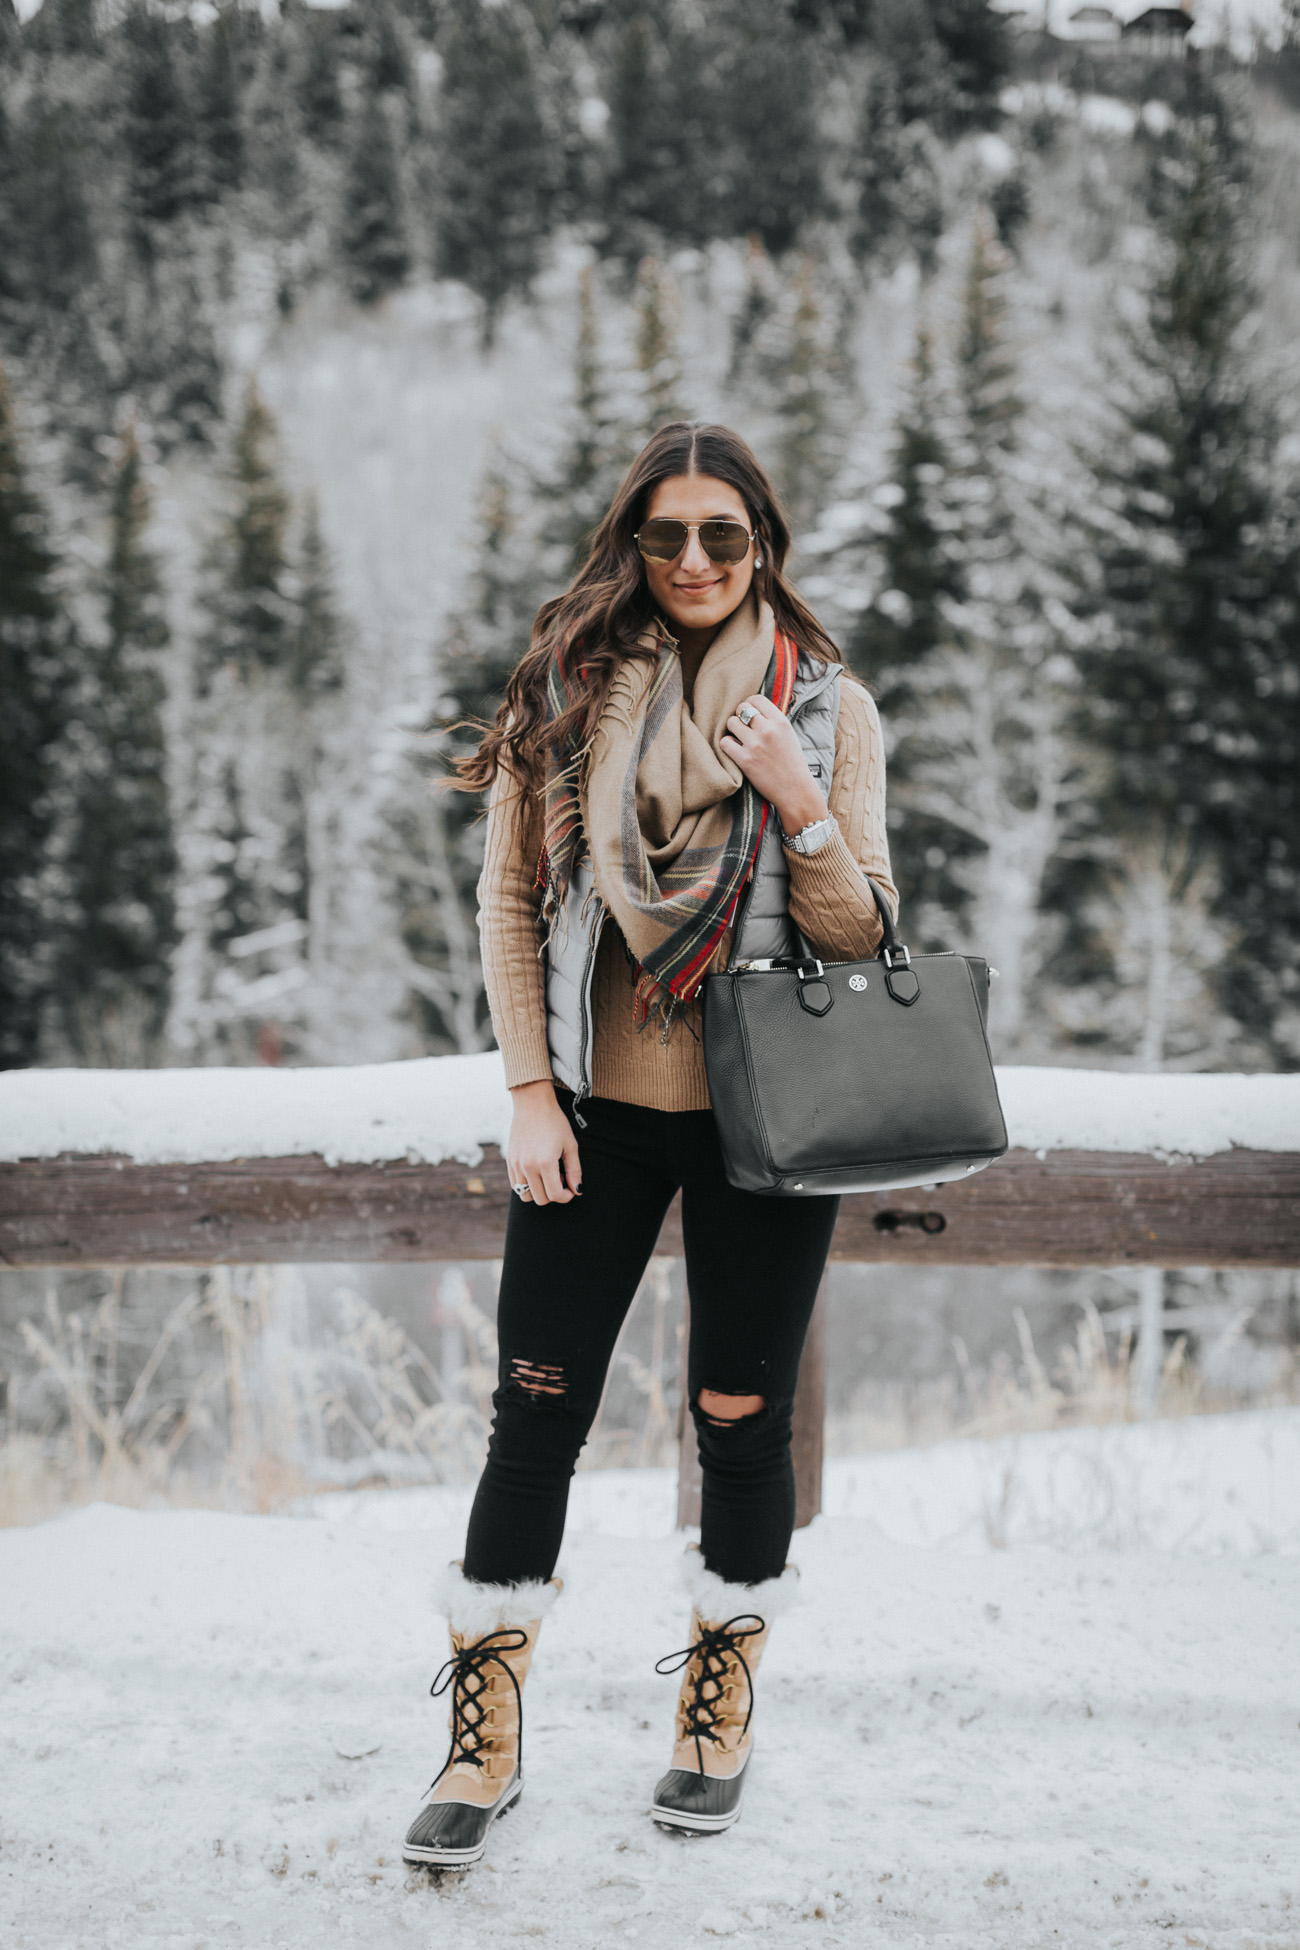 Chic Winter Outfit